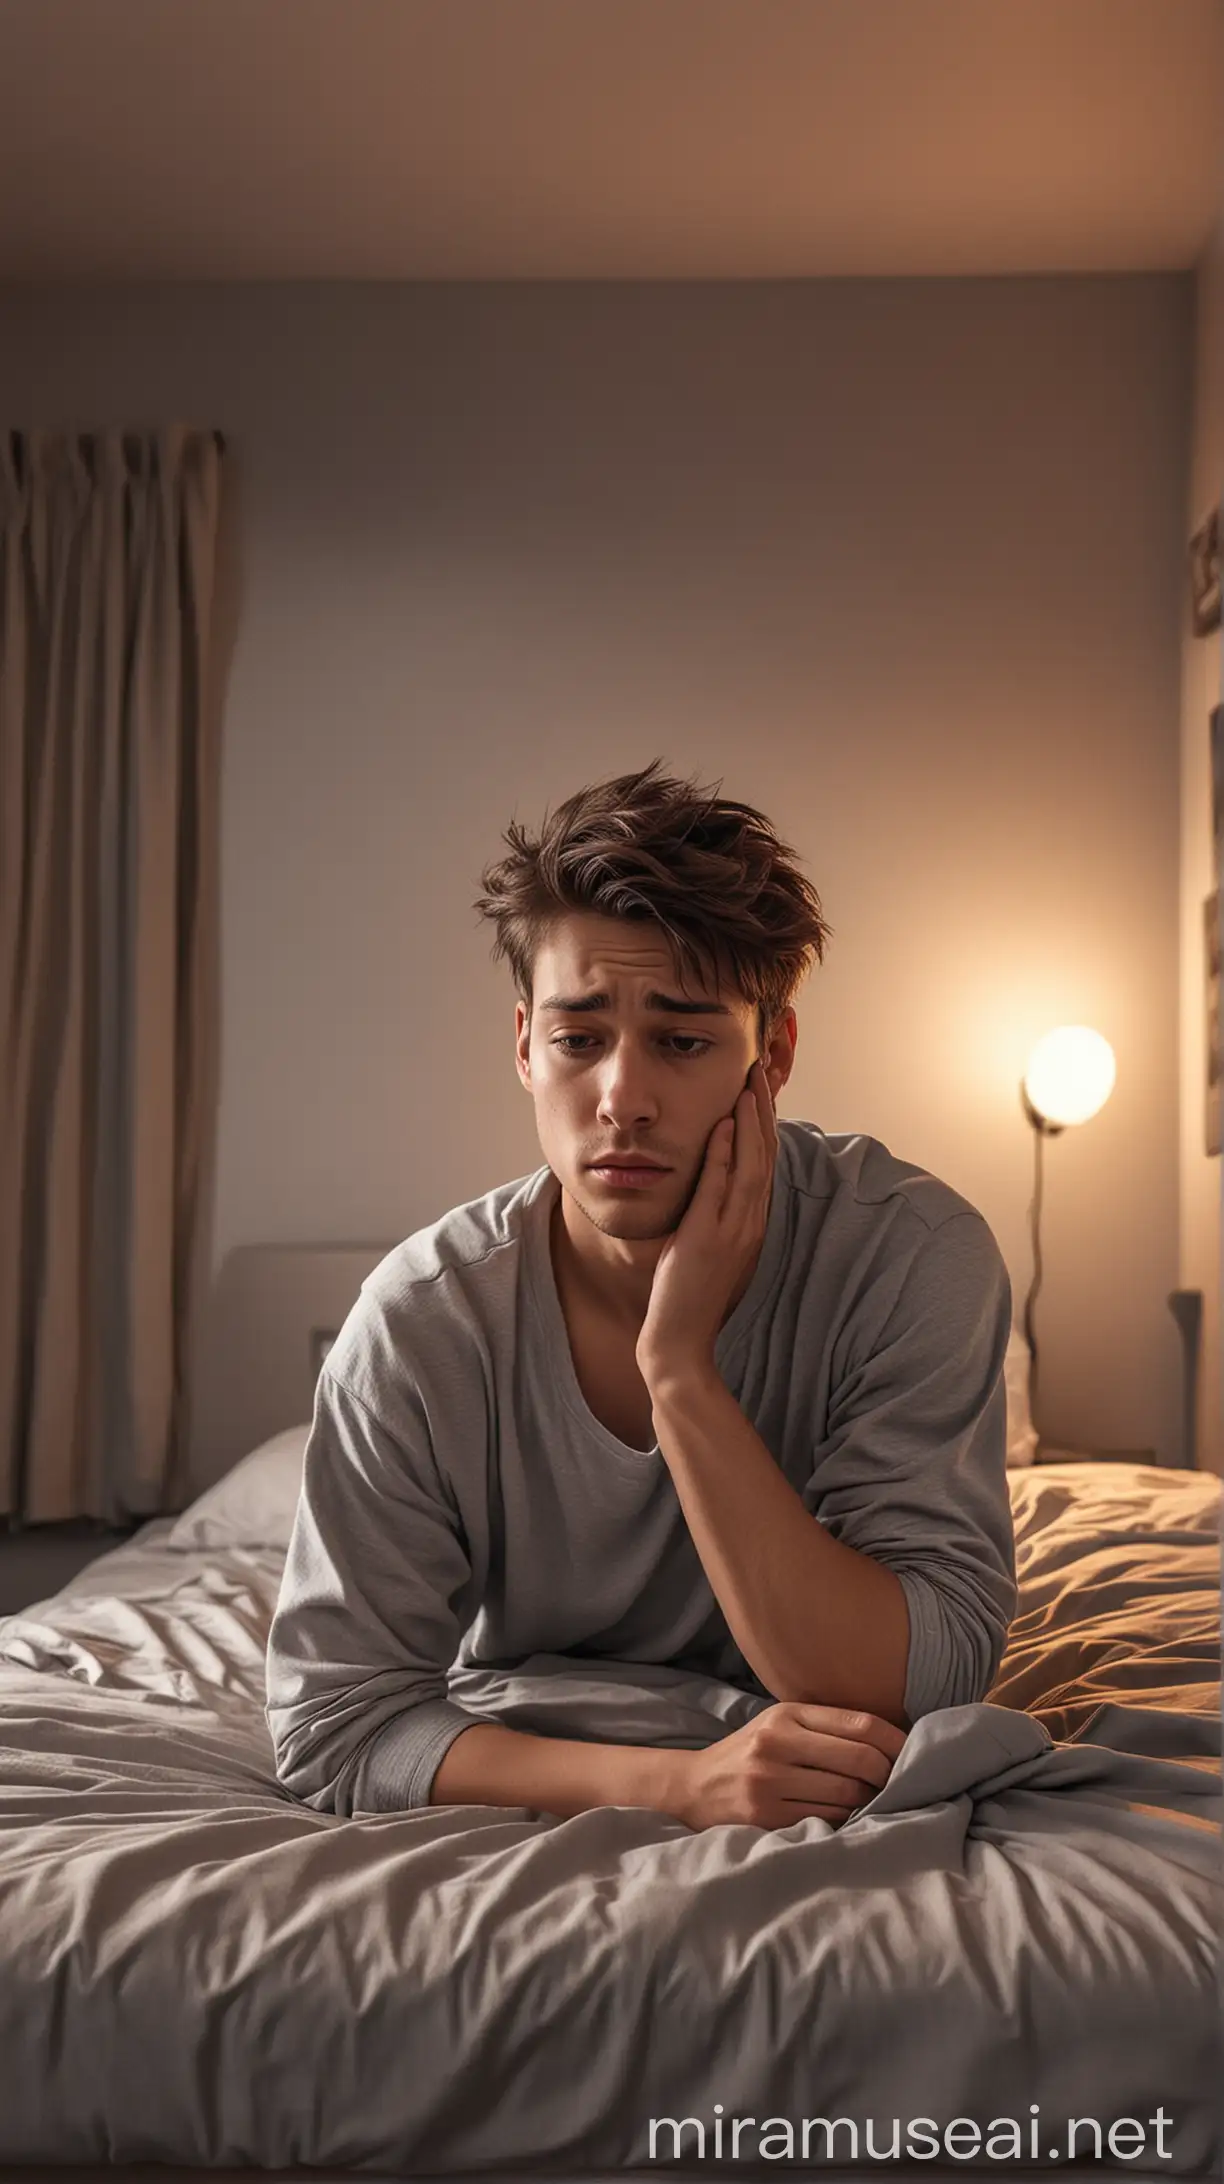 Exhausted Young Man in Vibrant Bedroom Scene Dynamic Lighting and Colors